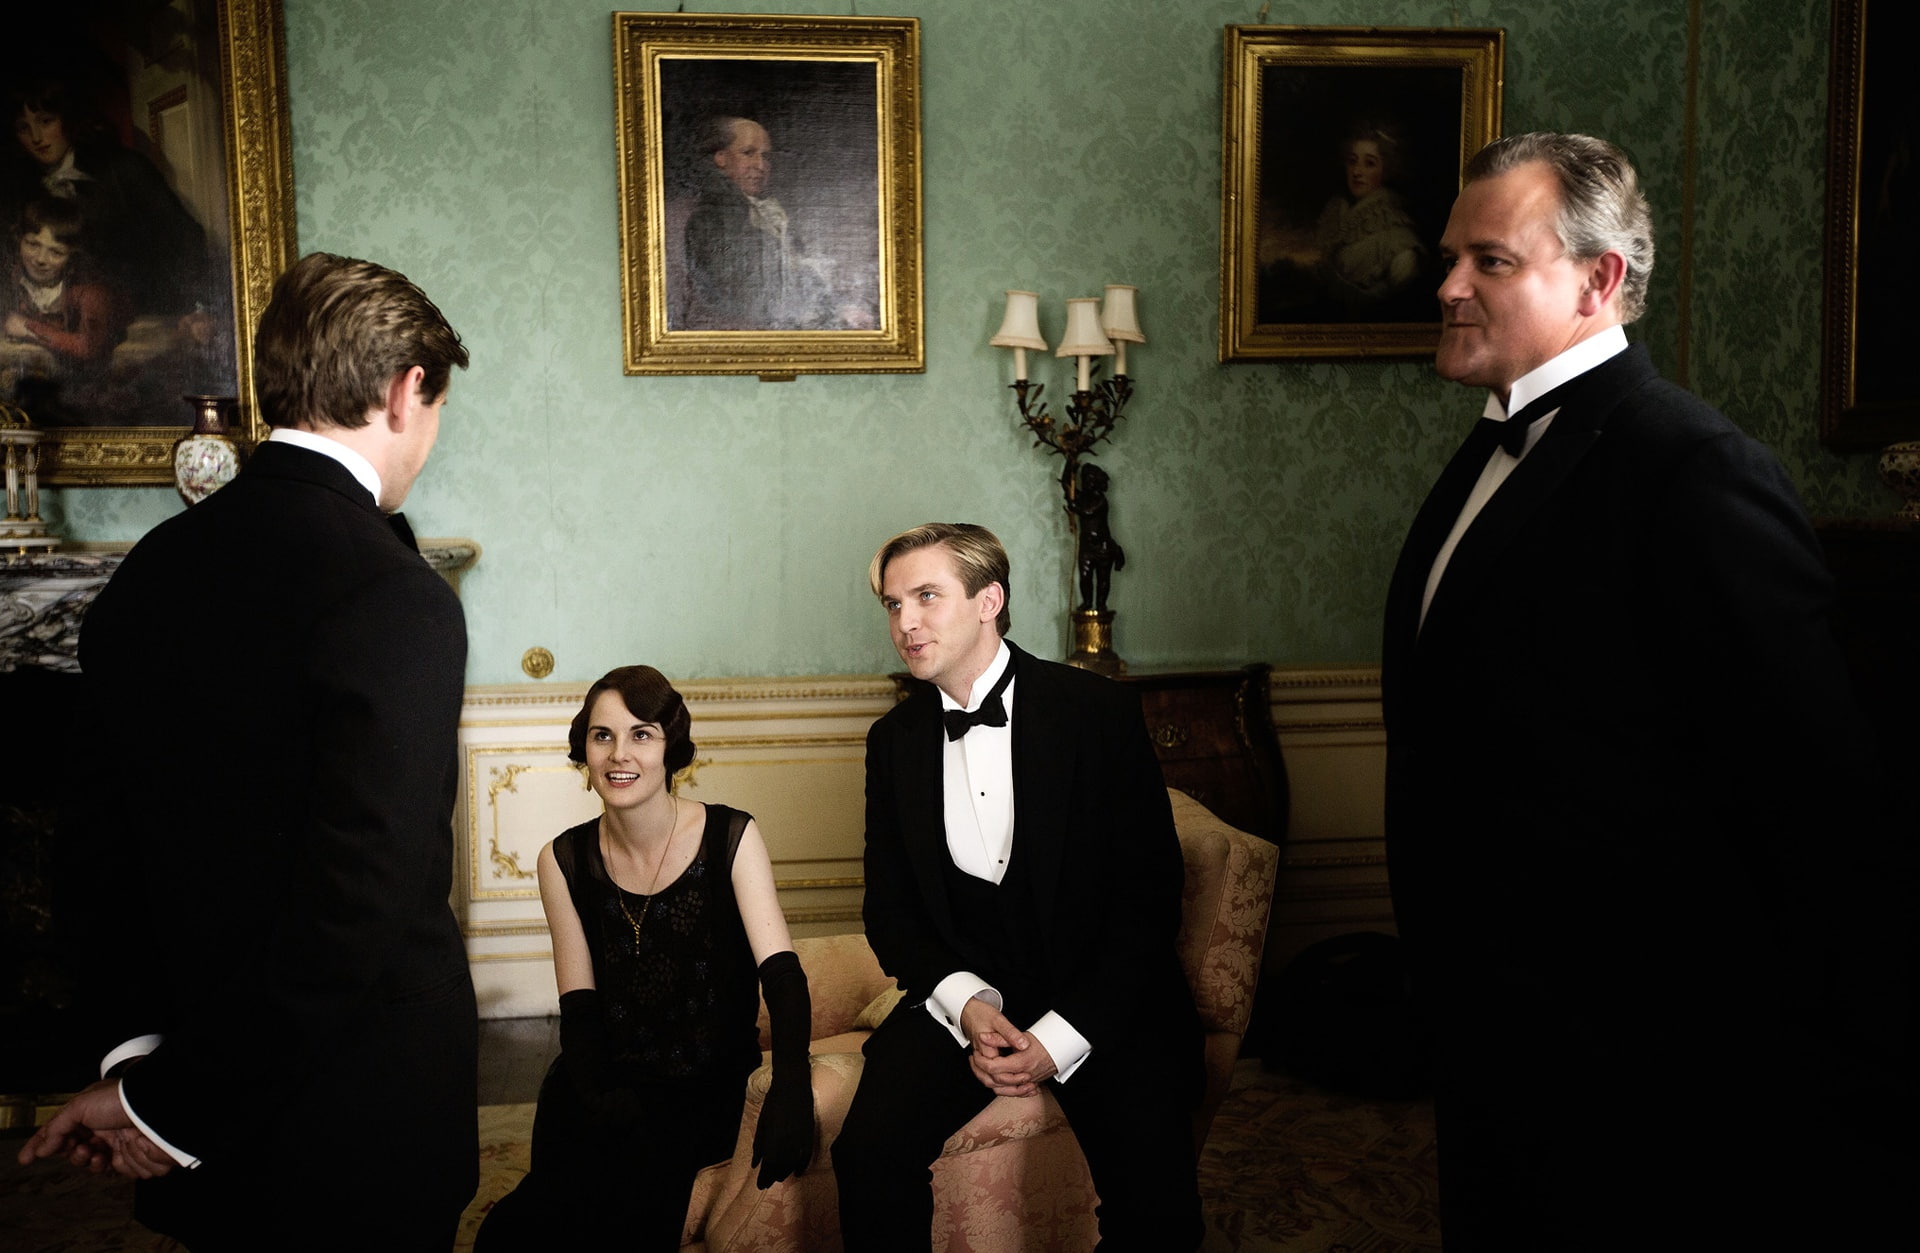 interior, frame, the series, actors, drama, characters, Downton Abbey